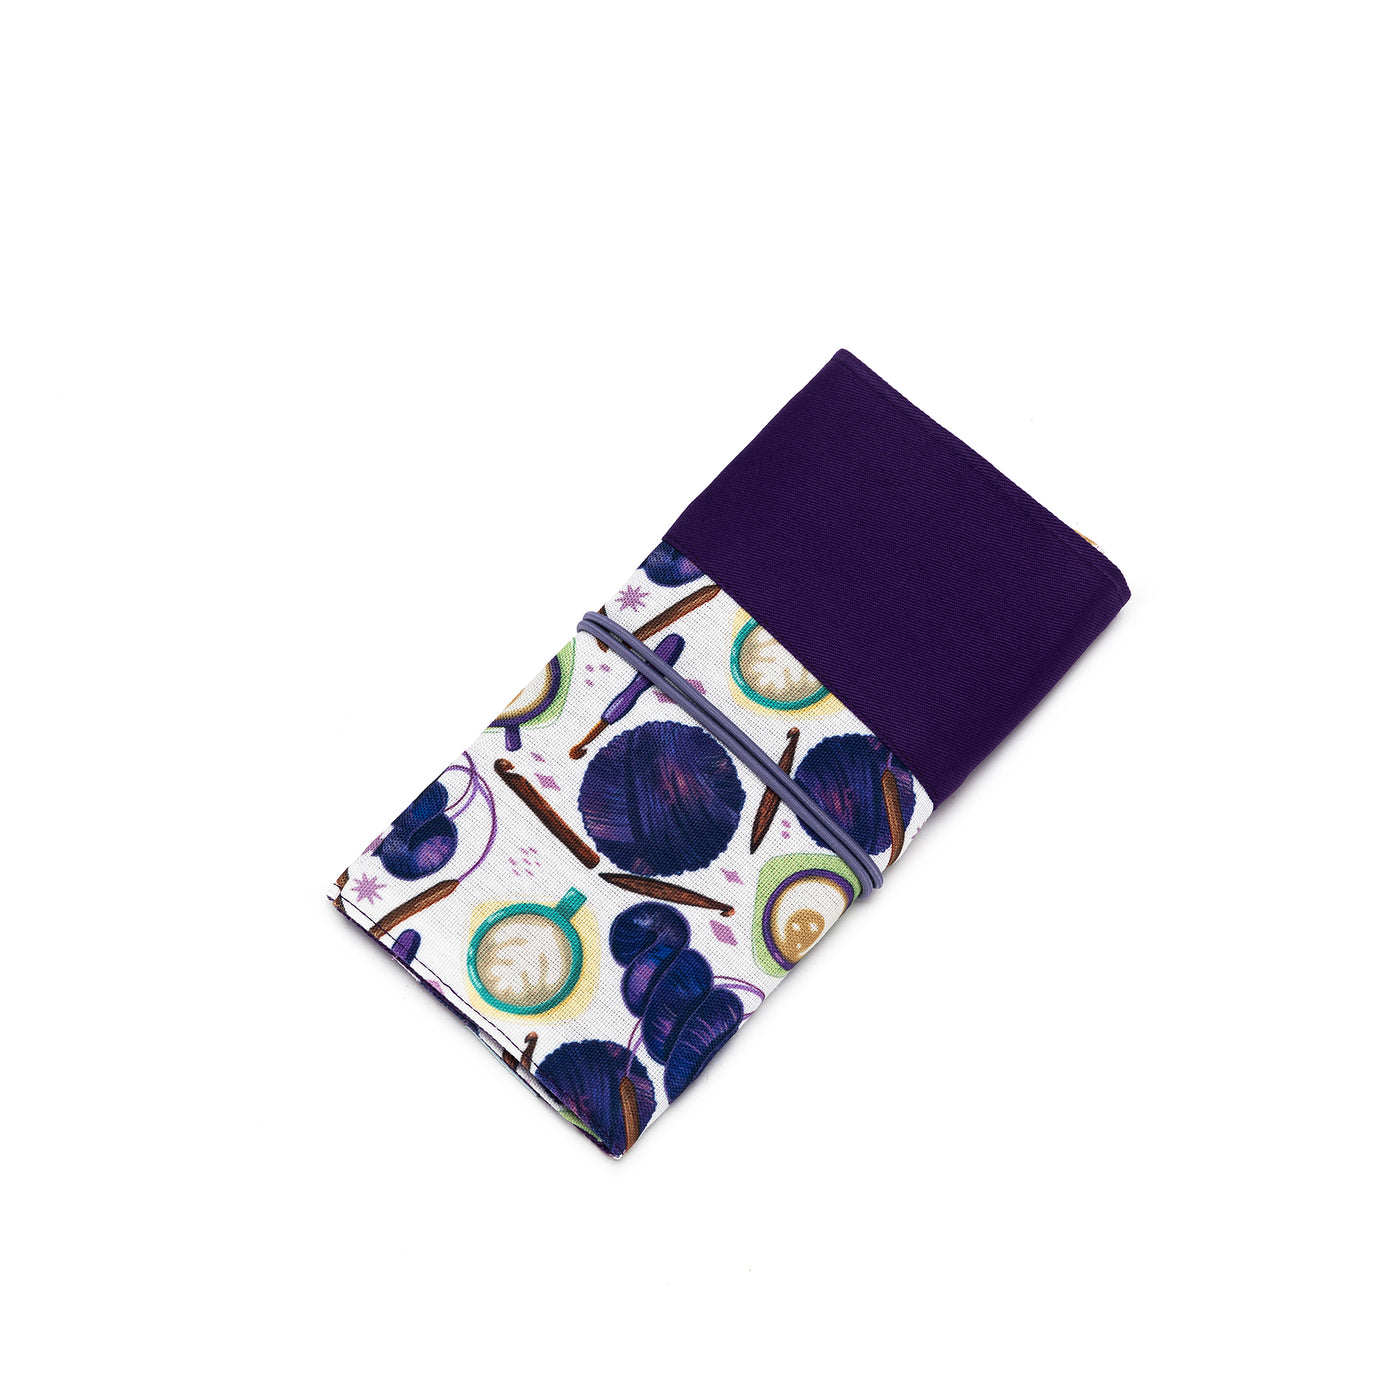 Interchangeable Needle Case | Coffee and Yarn Green Fabric Print (PREORDER)